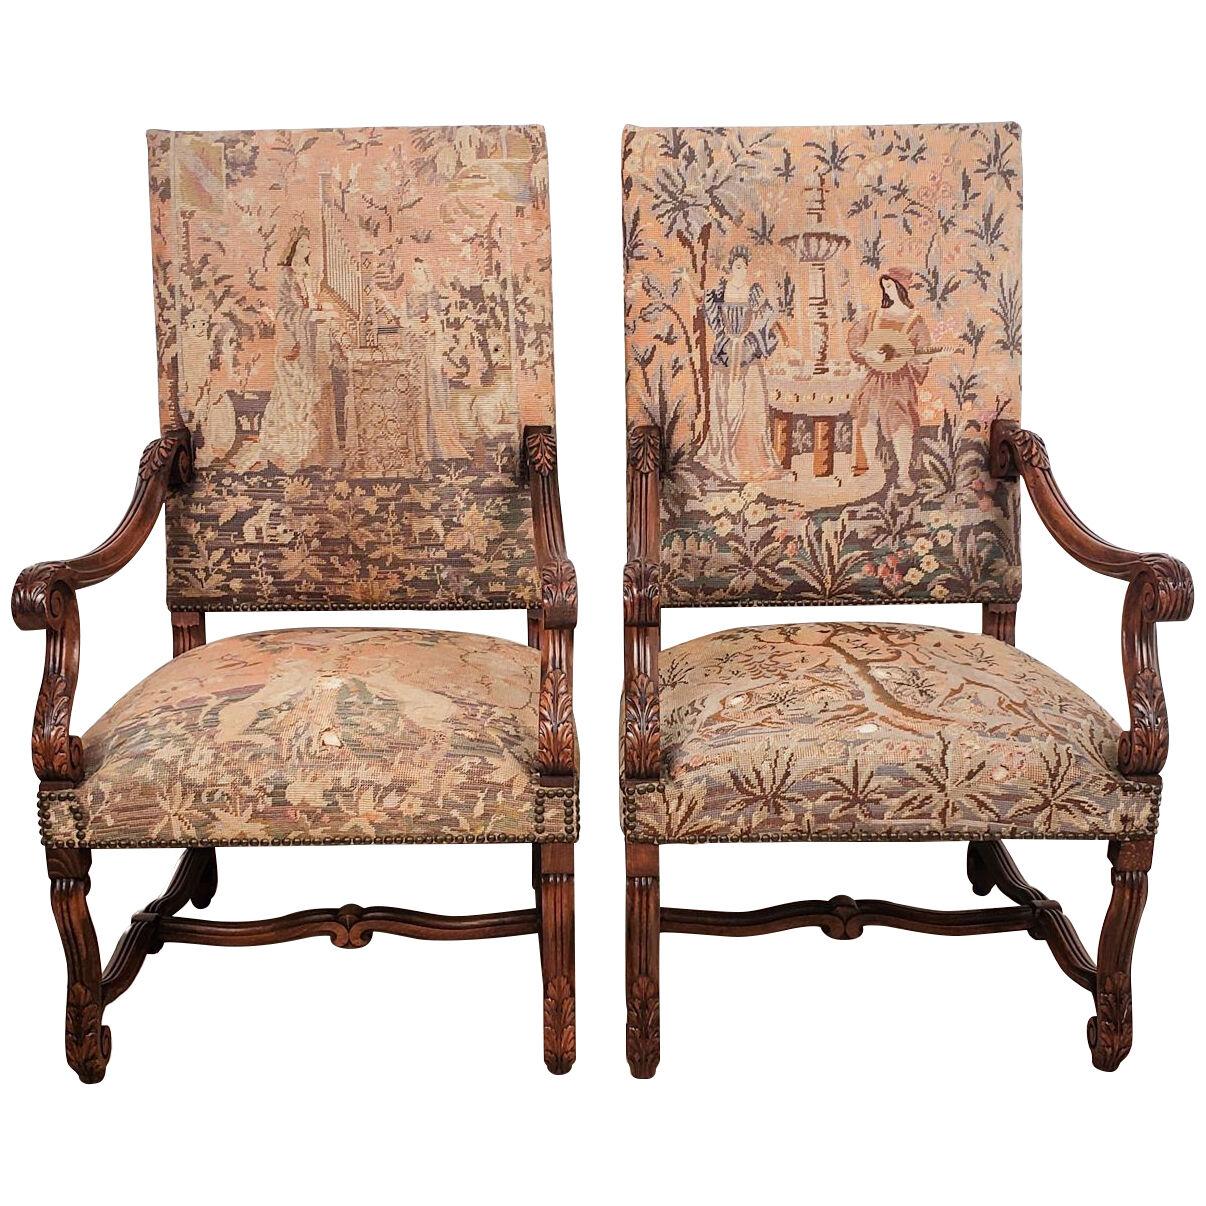 Pair of French Large Armchairs, Louis XIV Style, in Old Upholstery, circa 1900